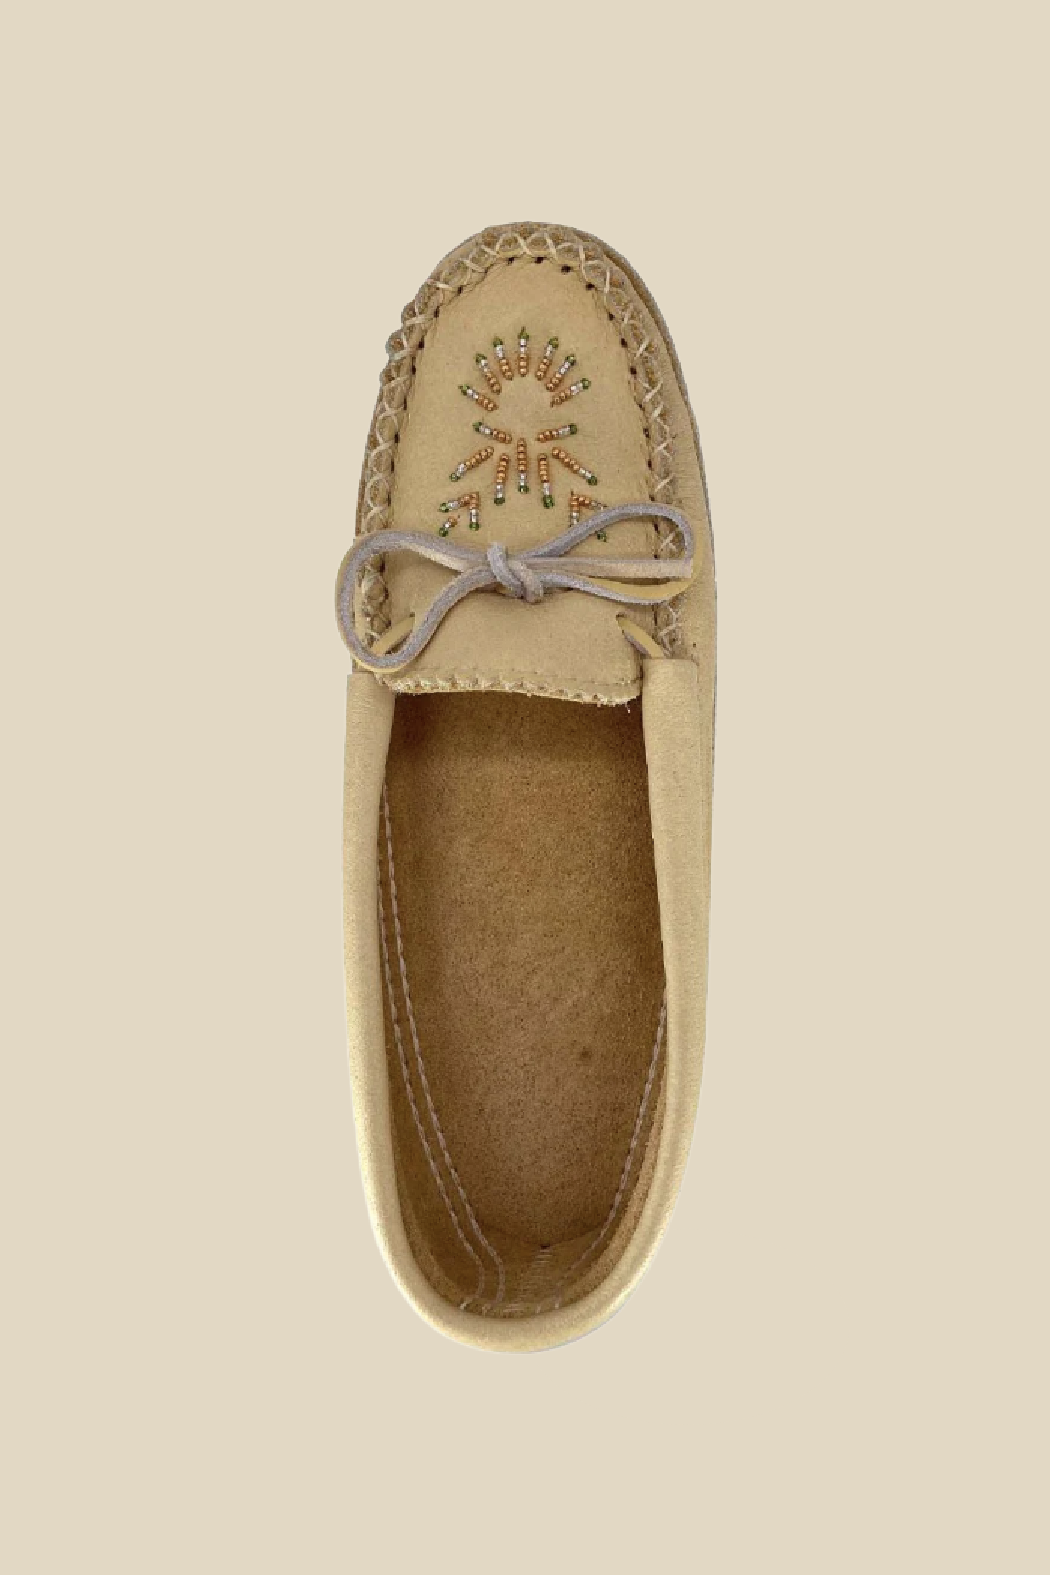 Moose Hide Leather Beaded Moccasins